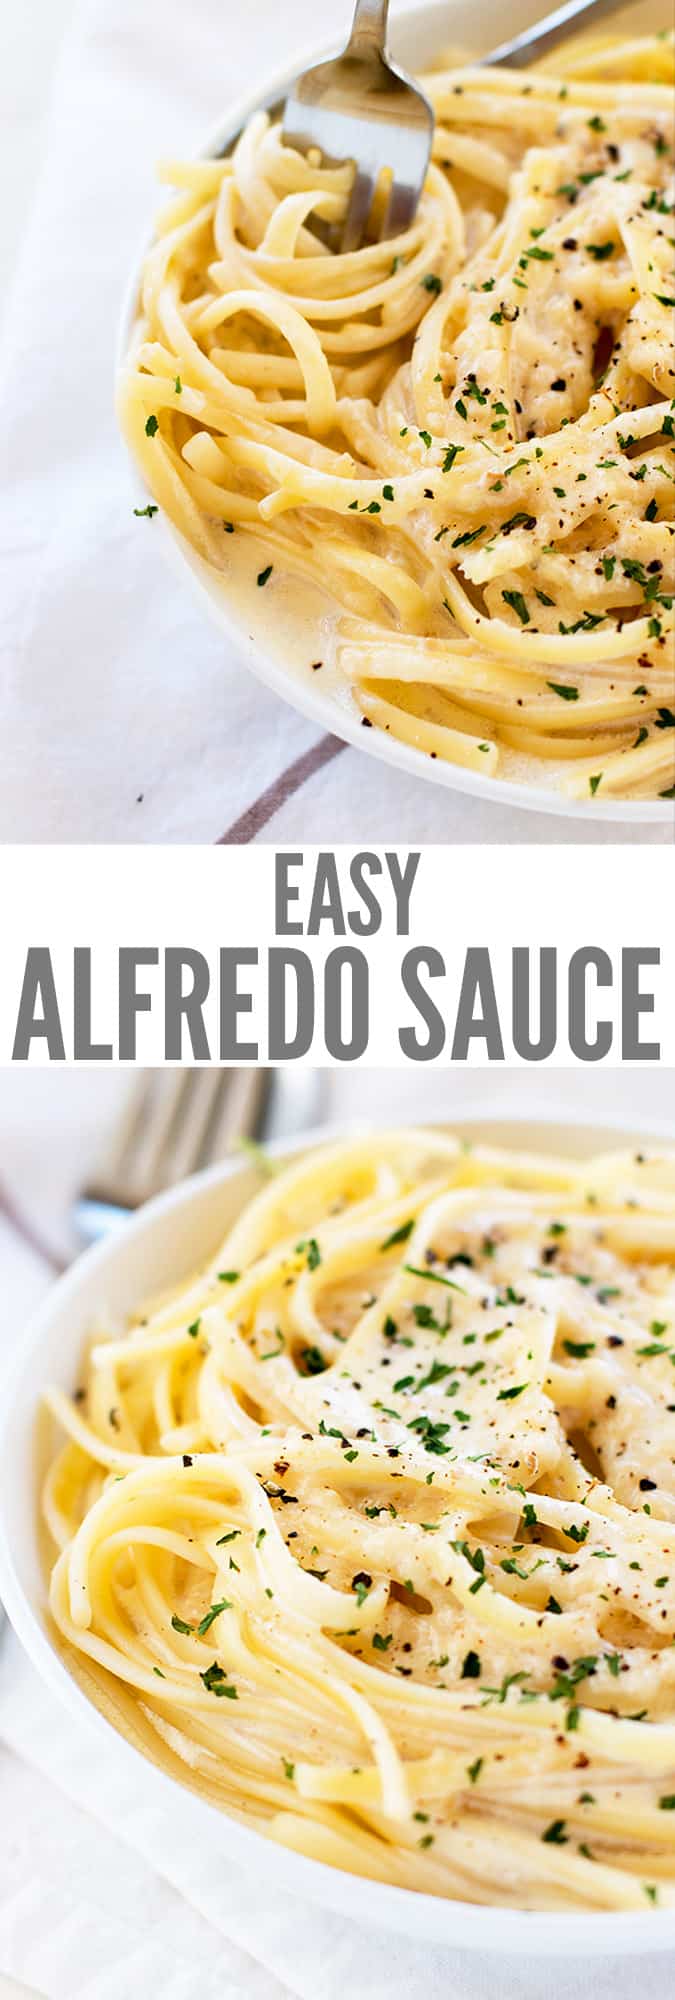 How to Make Alfredo Sauce from Scratch (15 Minute Recipe + Video)